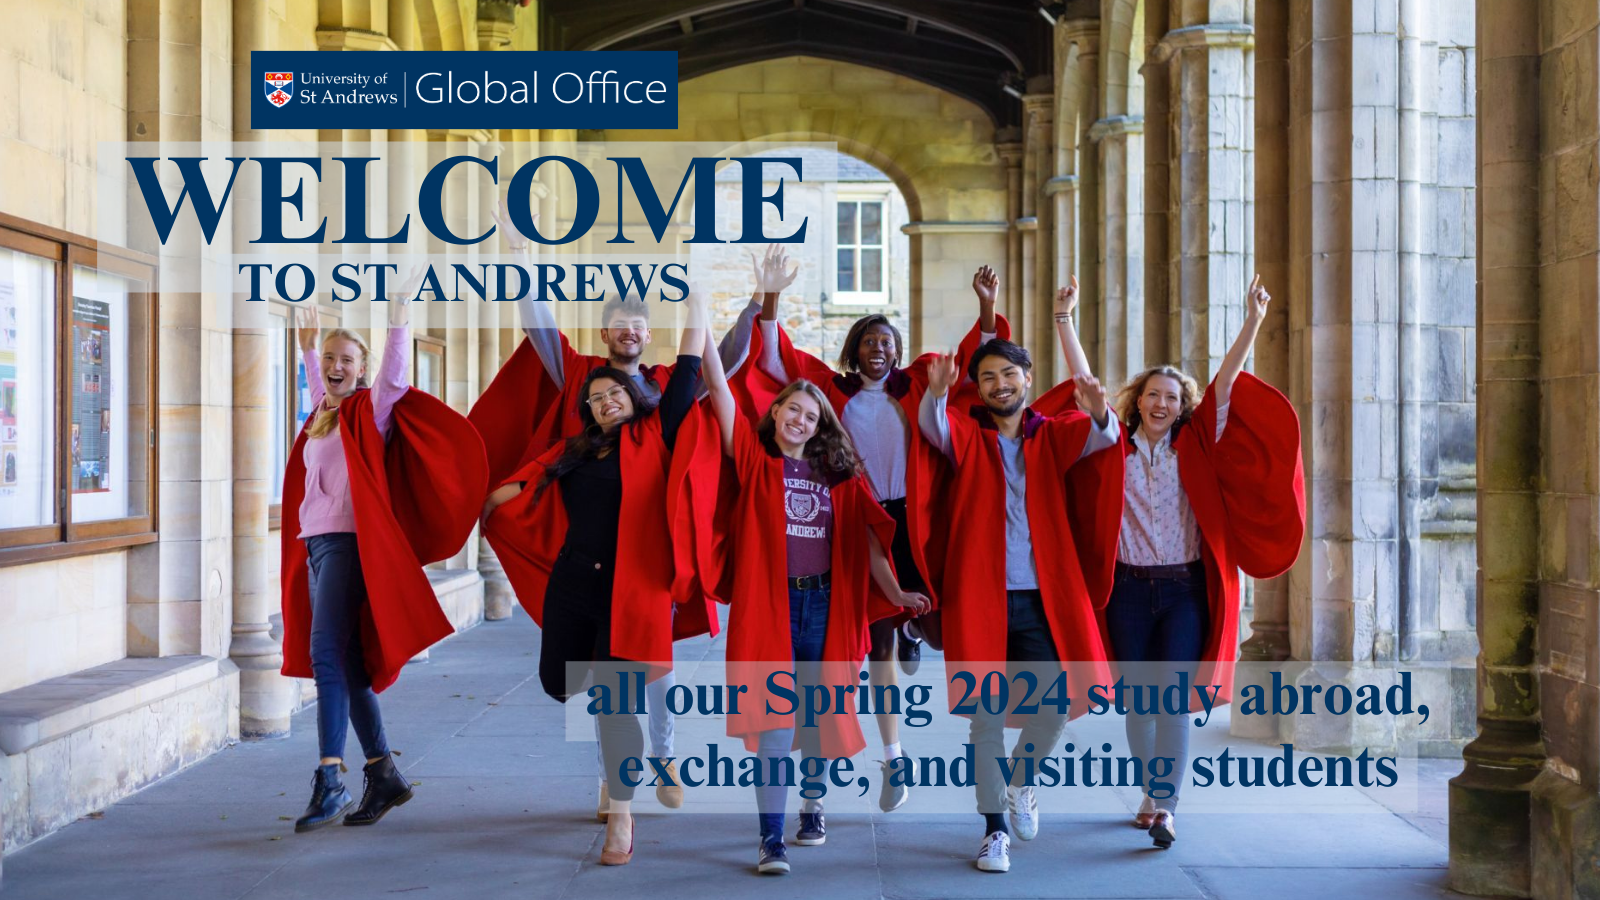 to all Spring 2024 Visiting, Study Abroad, and Exchange